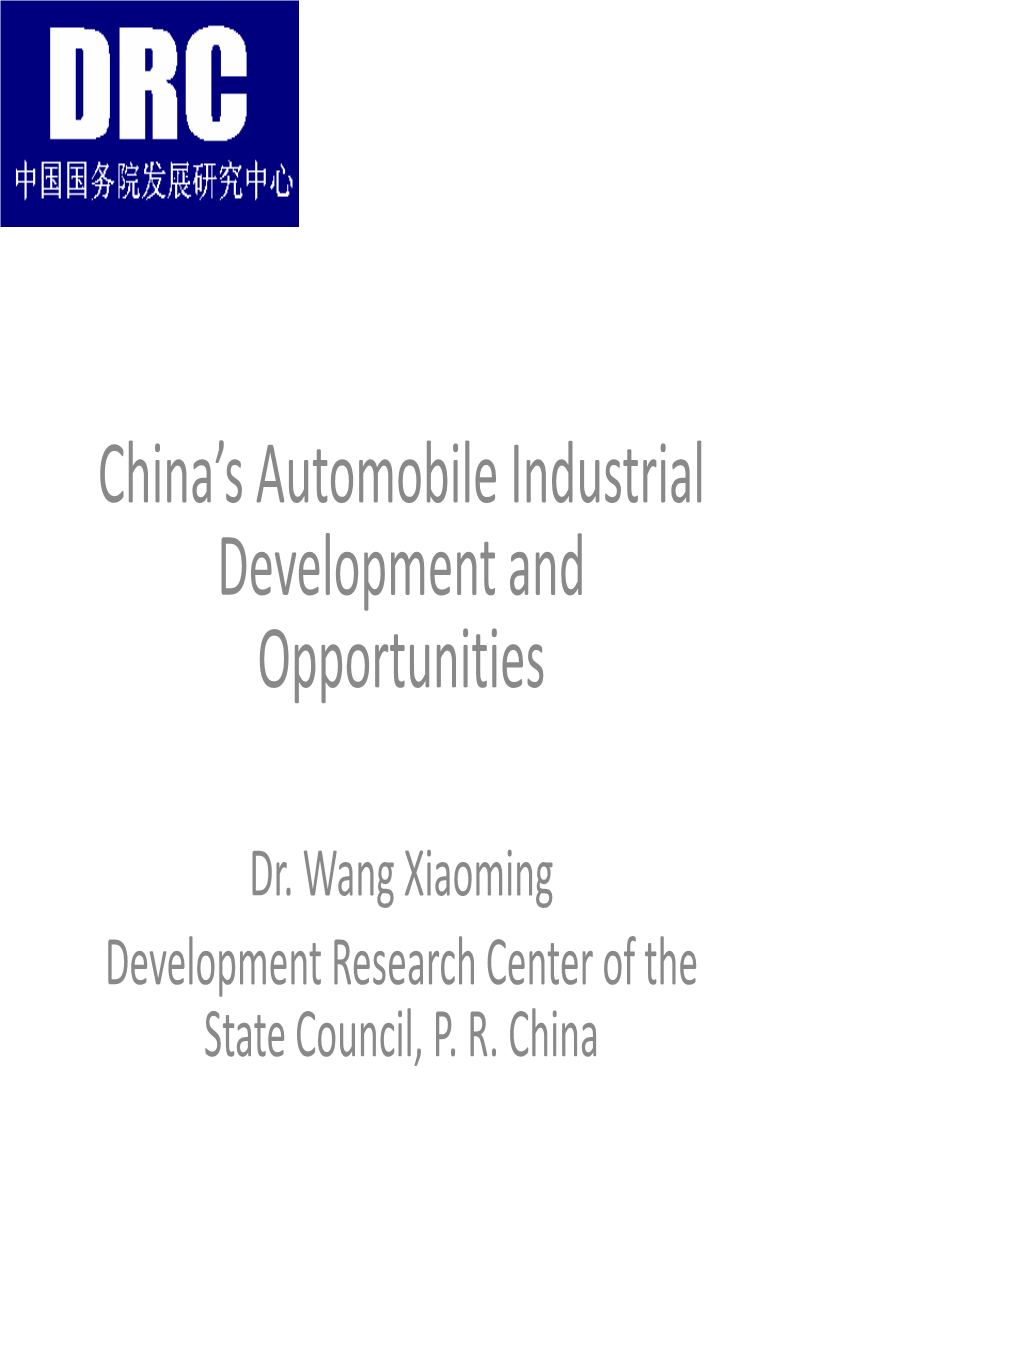 China's Automobile Industrial Development and Opportunities